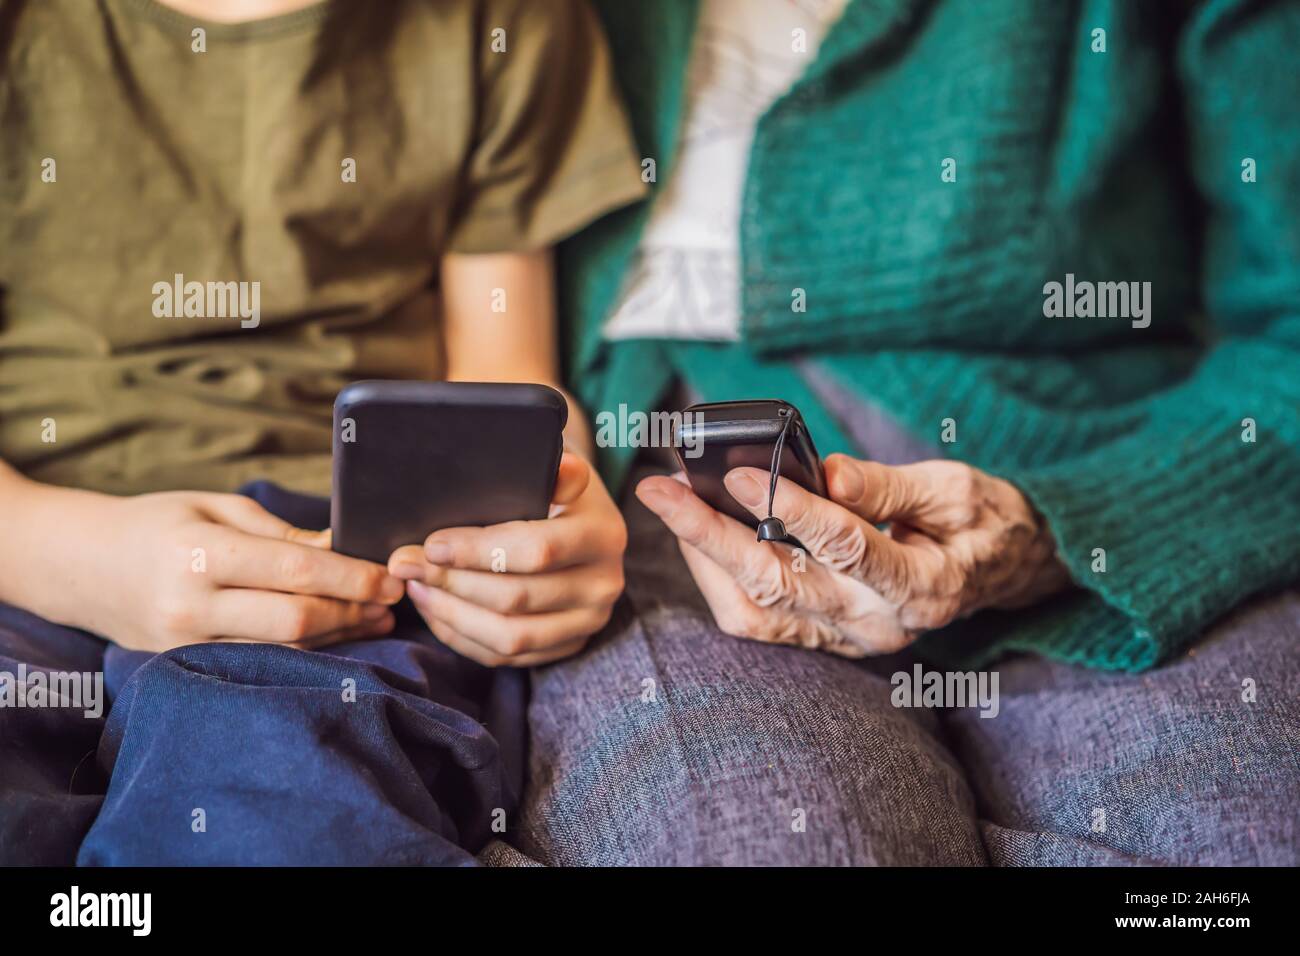 Old woman uses an old phone, boy uses a smartphone Stock Photo